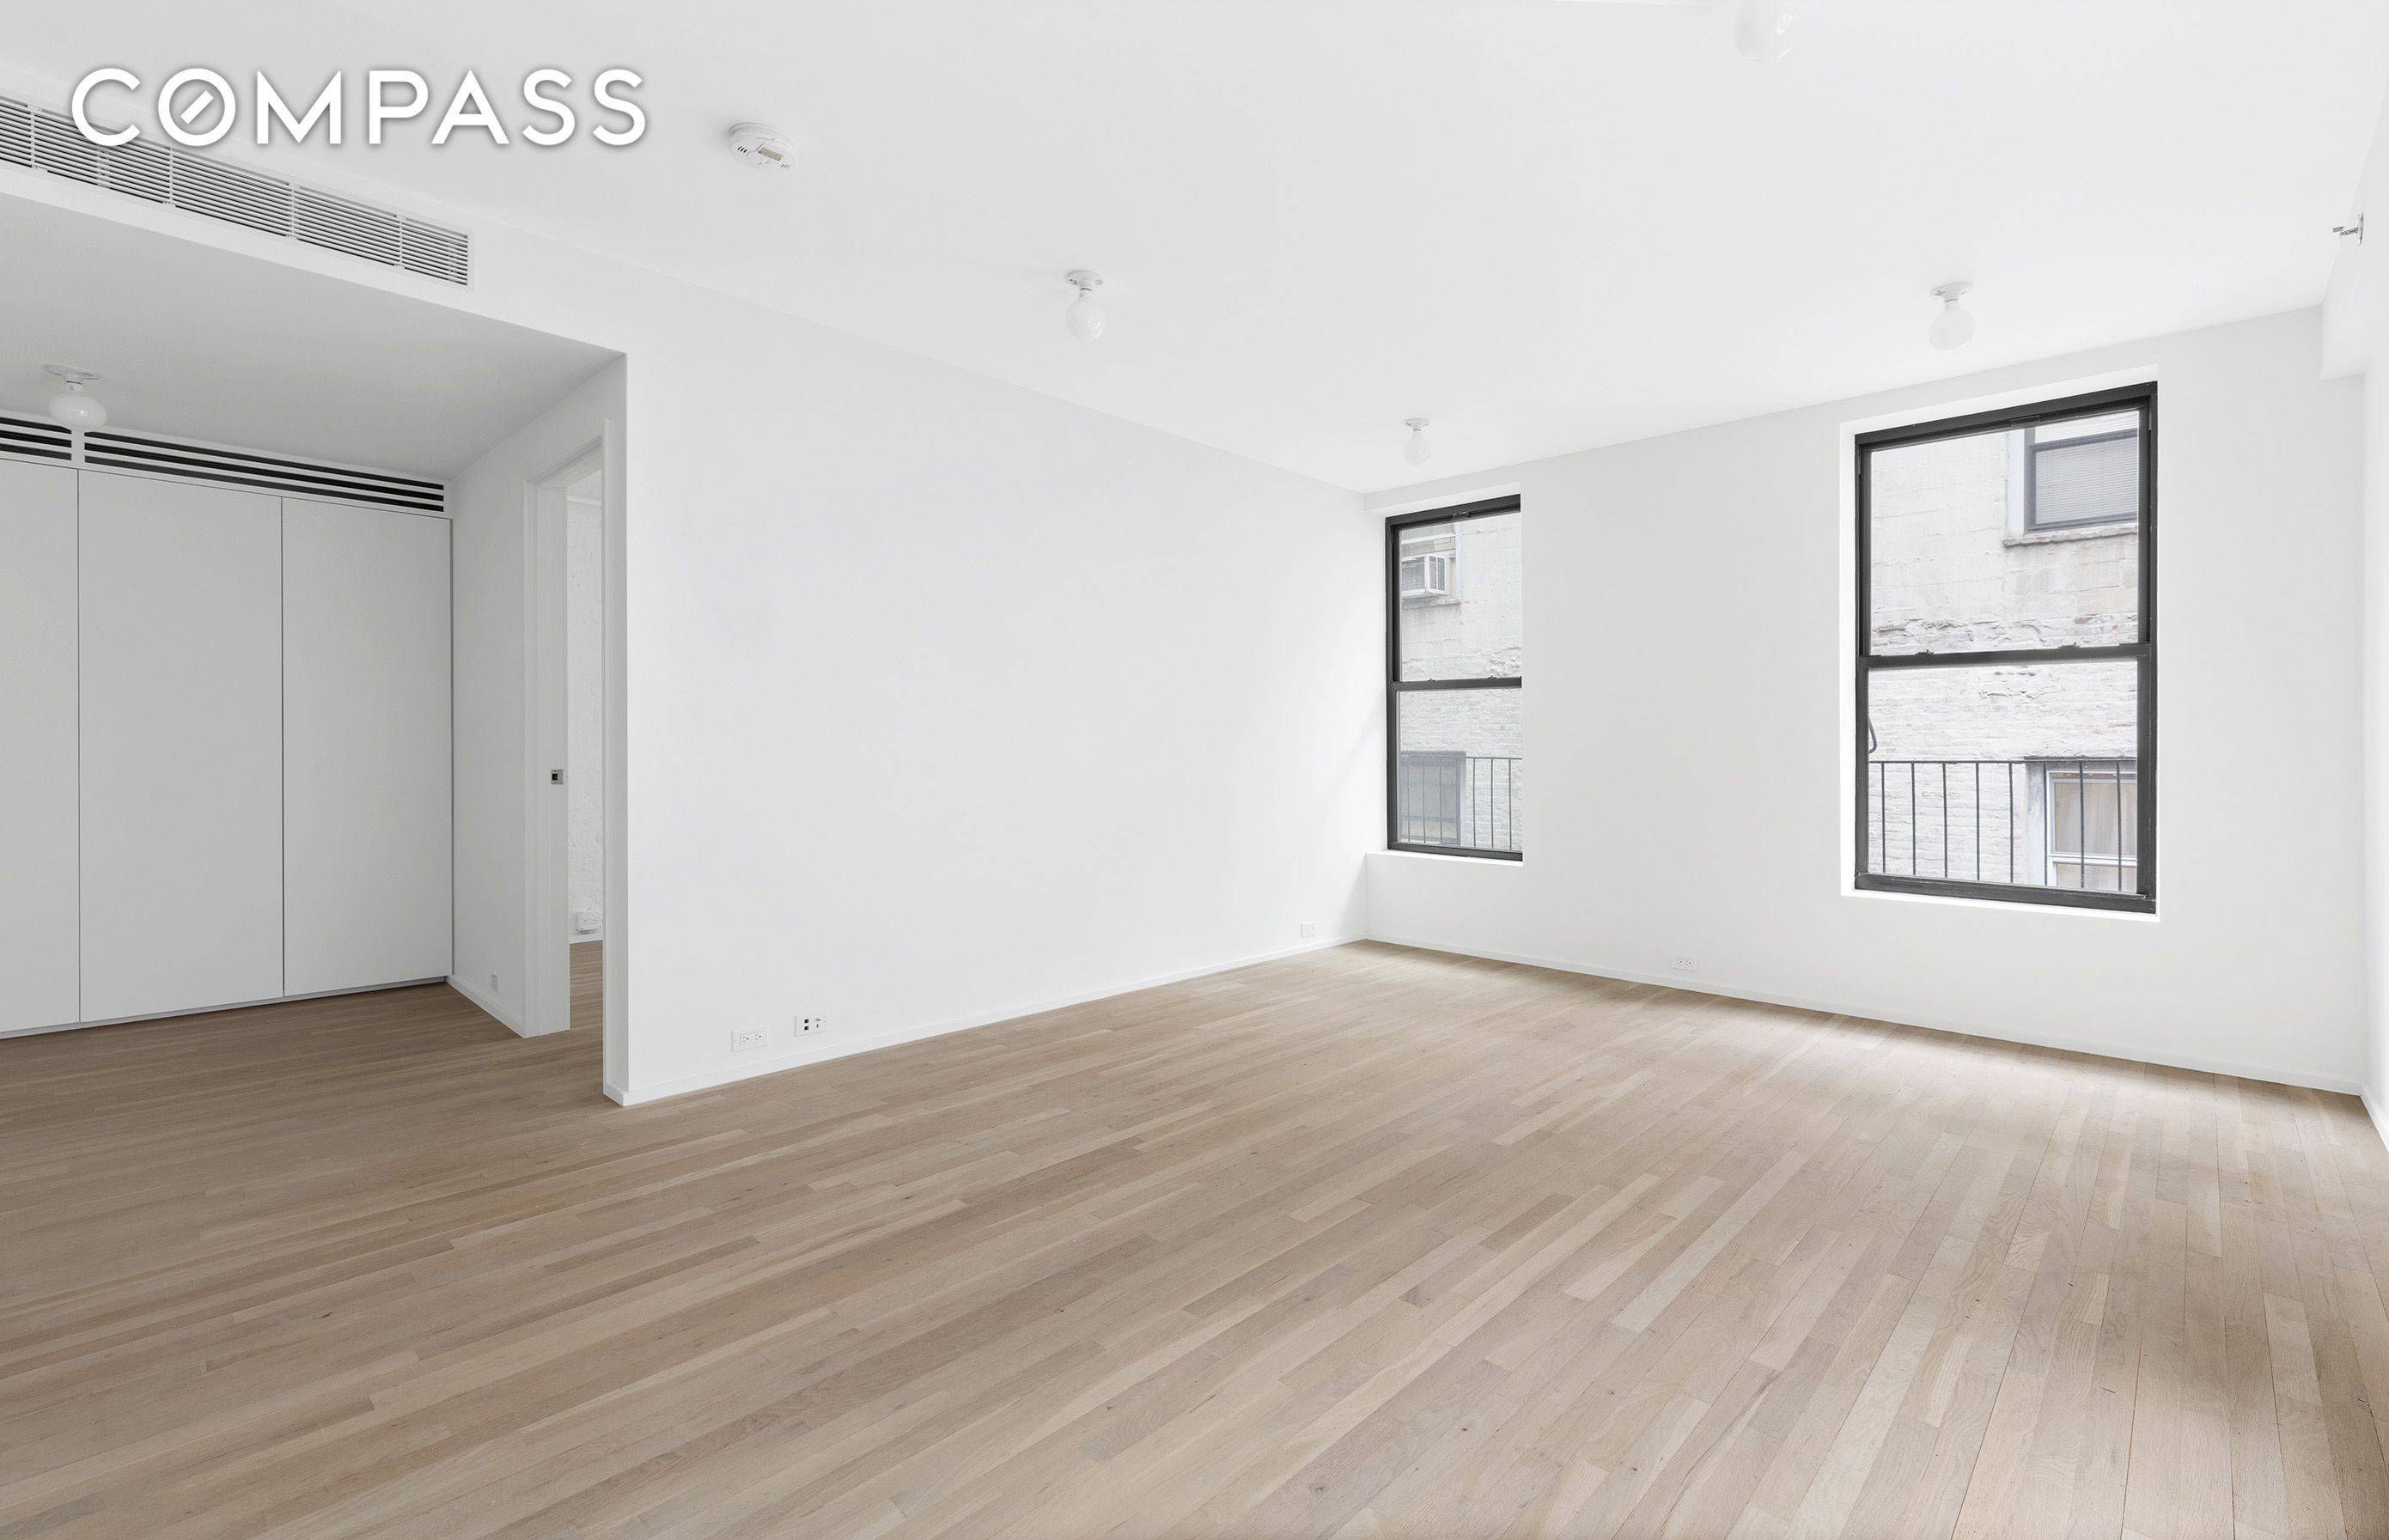 Great opportunity, be the first to live in this brand new, total gut renovation 1BR 1BA in a boutique elevator building in downtown NYC.